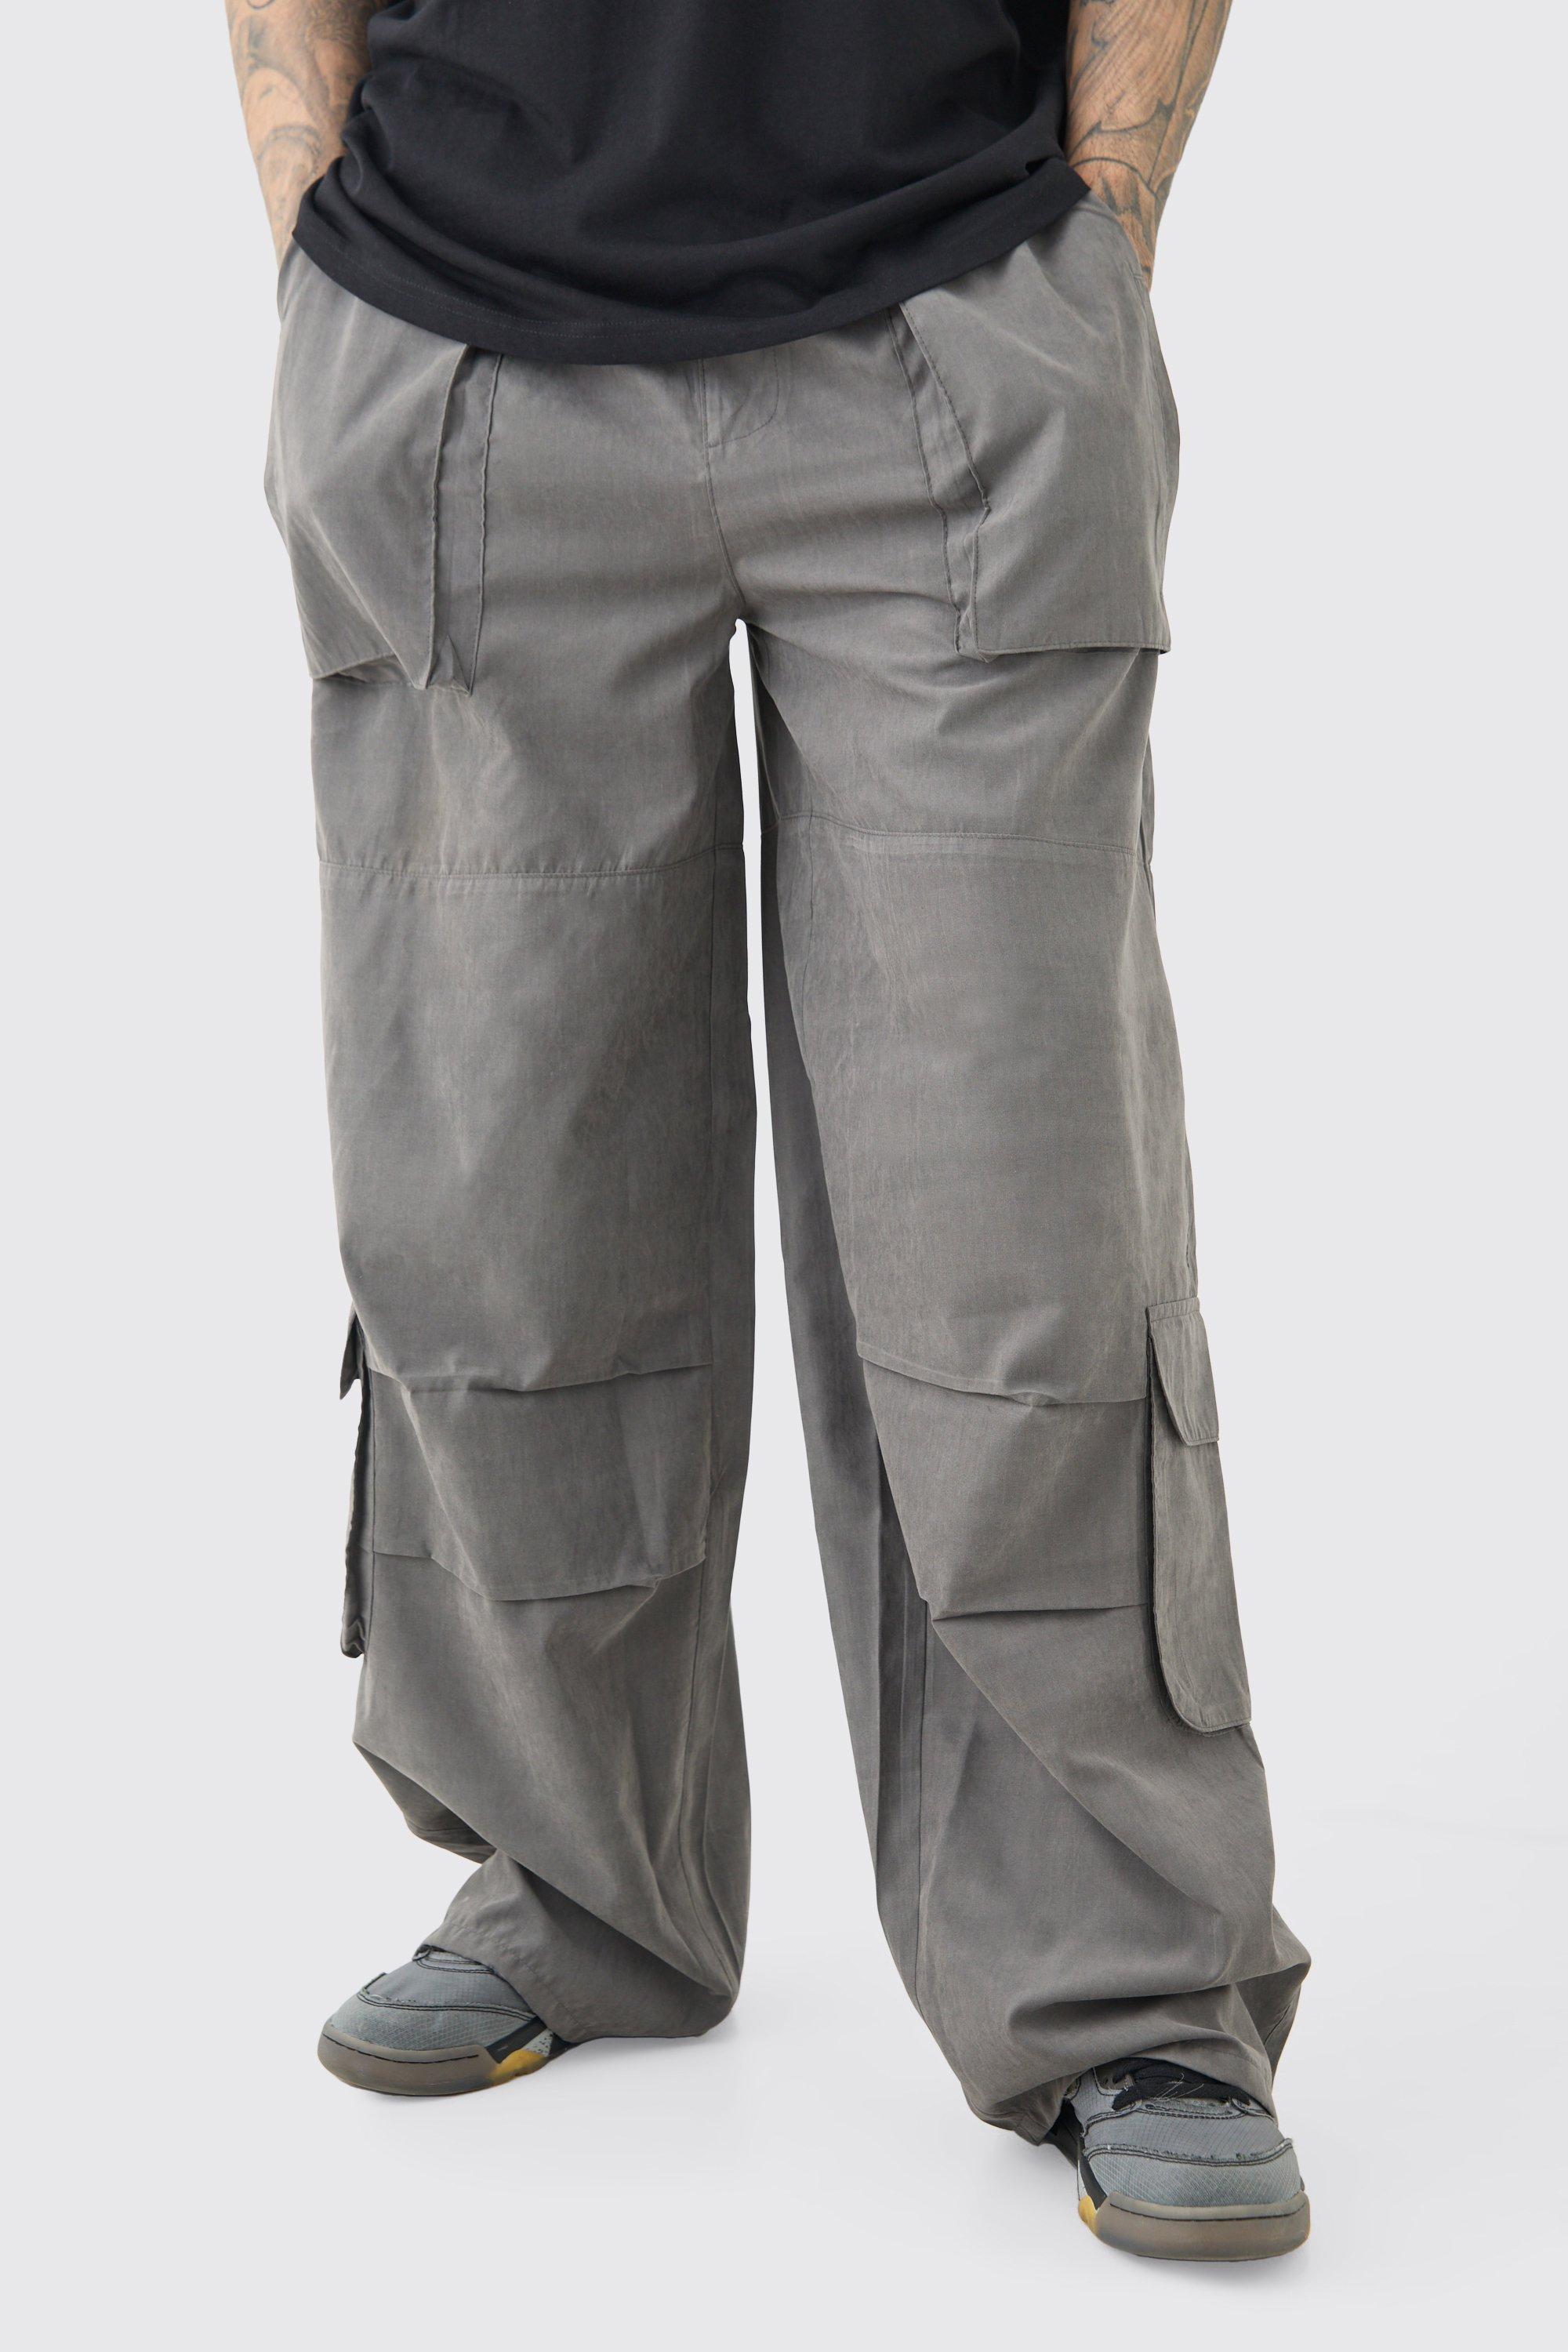 Image of Tall Elasticated Waist Oversized Peached Cargo Trouser, Grigio